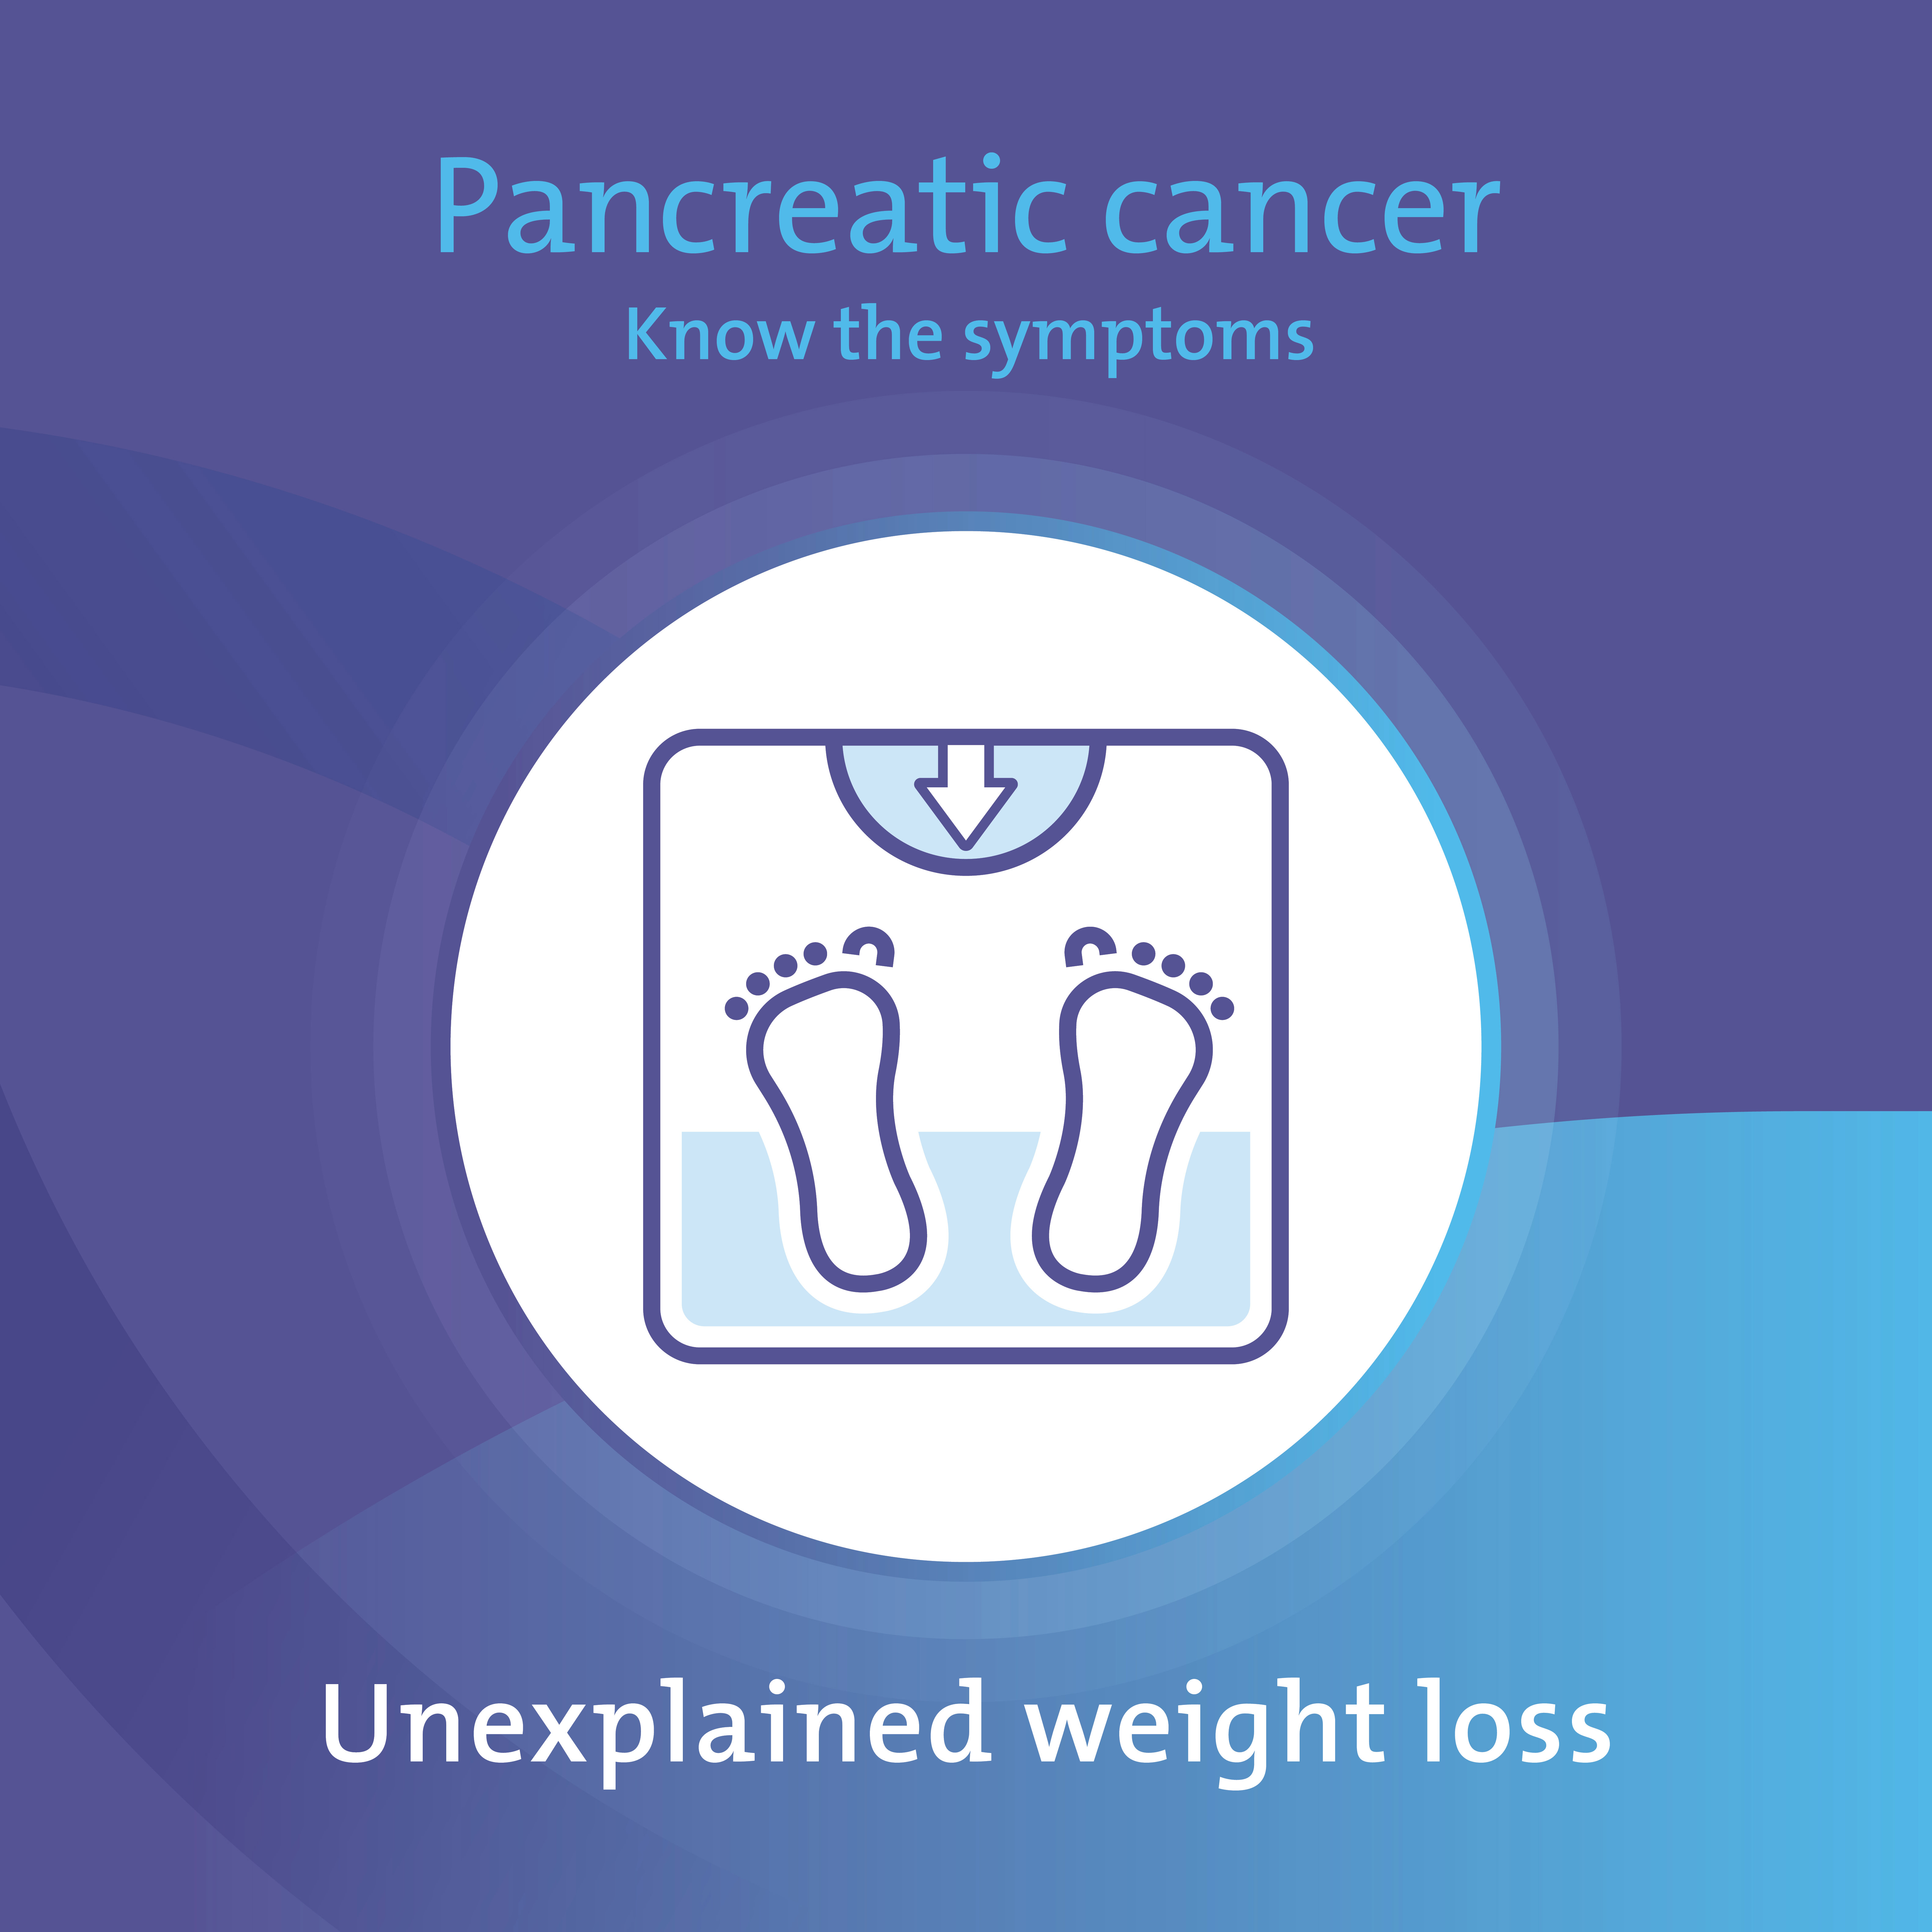 Pancreatic cancer - know the symptoms - unexplained weight loss